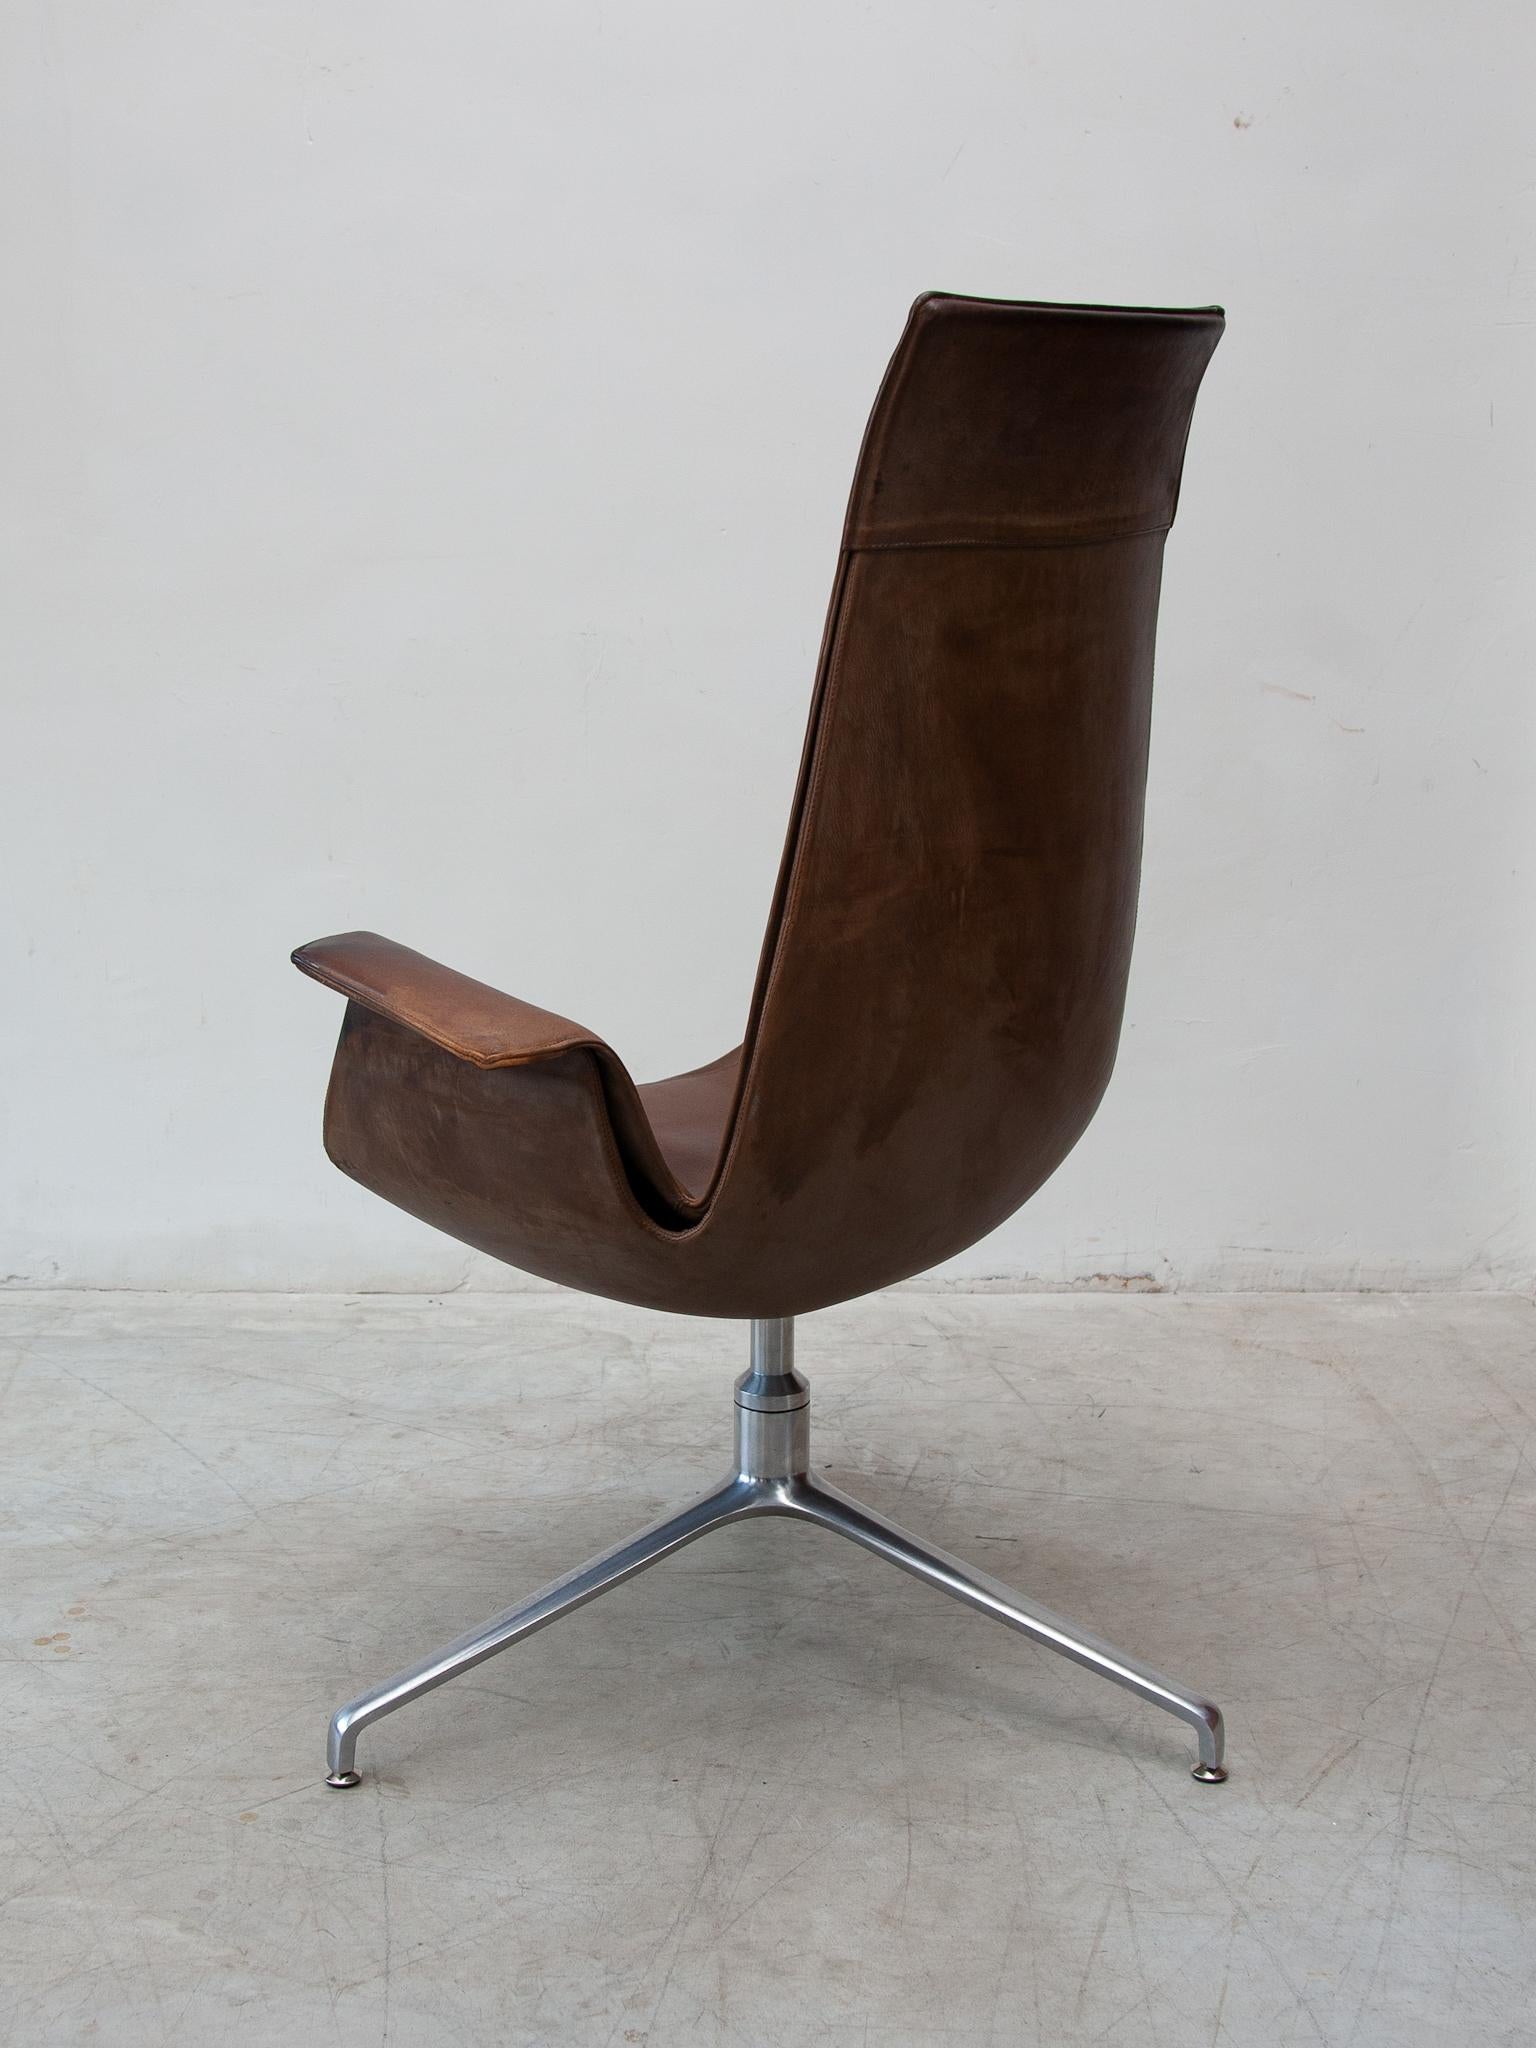 Fabricius & Kastholm FK6725 Desk, Lounge Chair in Brown Leather, Kill 2